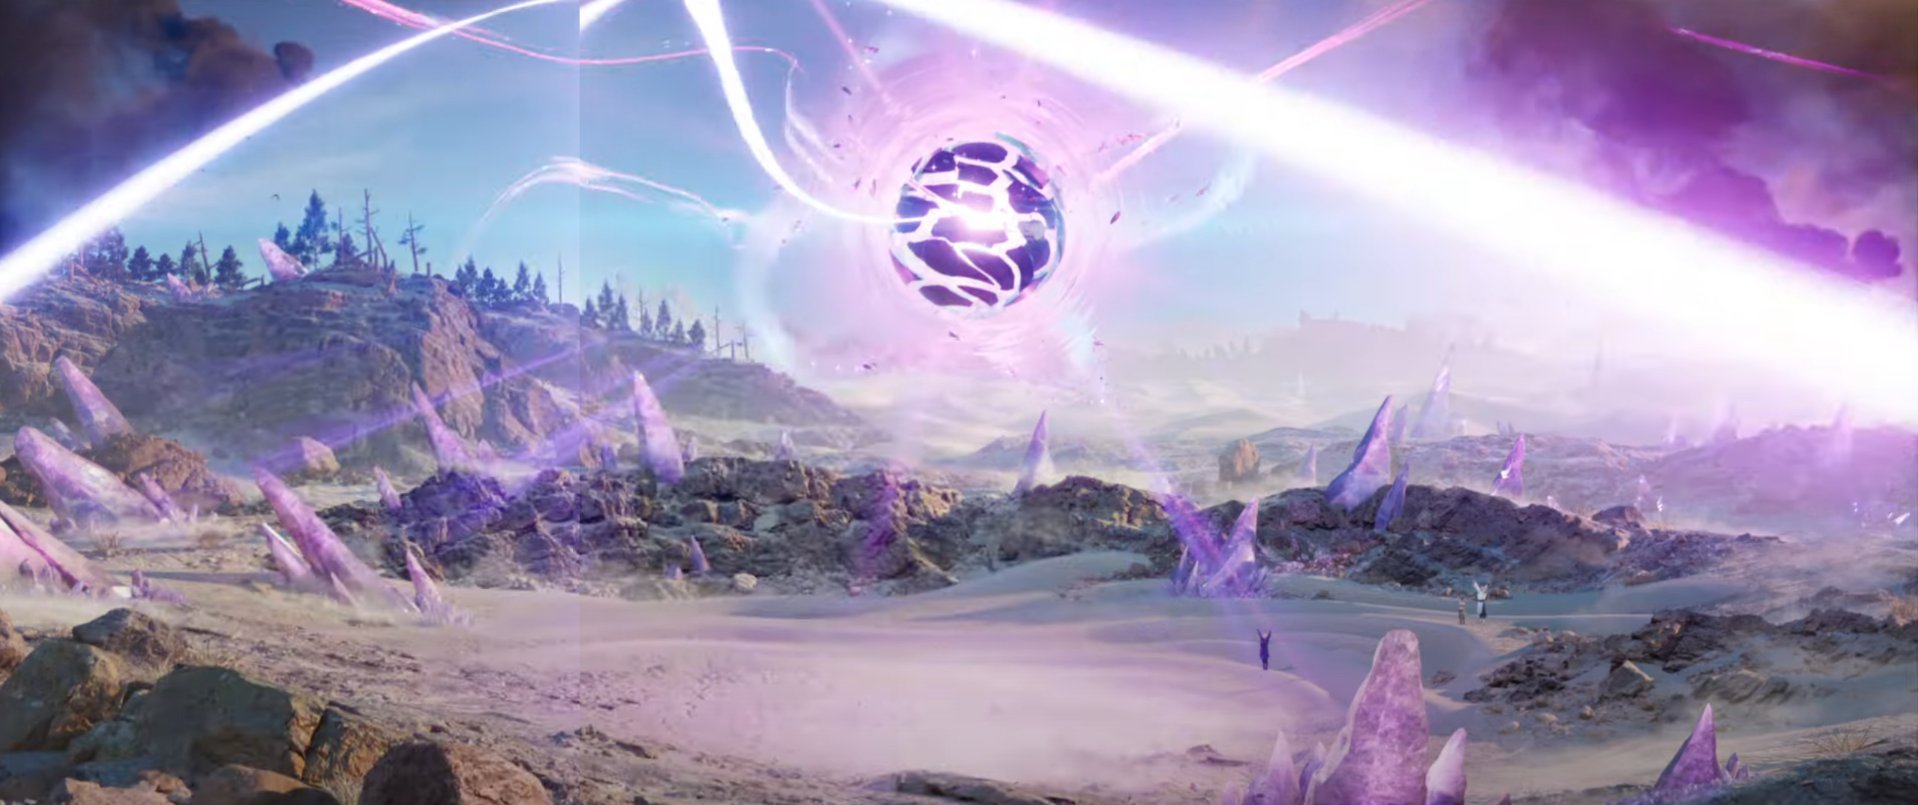 Sweetrabbit Wait A Minute The Zero Point Was Actually Added On Google Maps Recently As A Shrine In A Desert Area And In The Season 6 Cinematic Trailer We Got A Glimpse Of The Real World Were Some People Were Seen Praying To The Zero